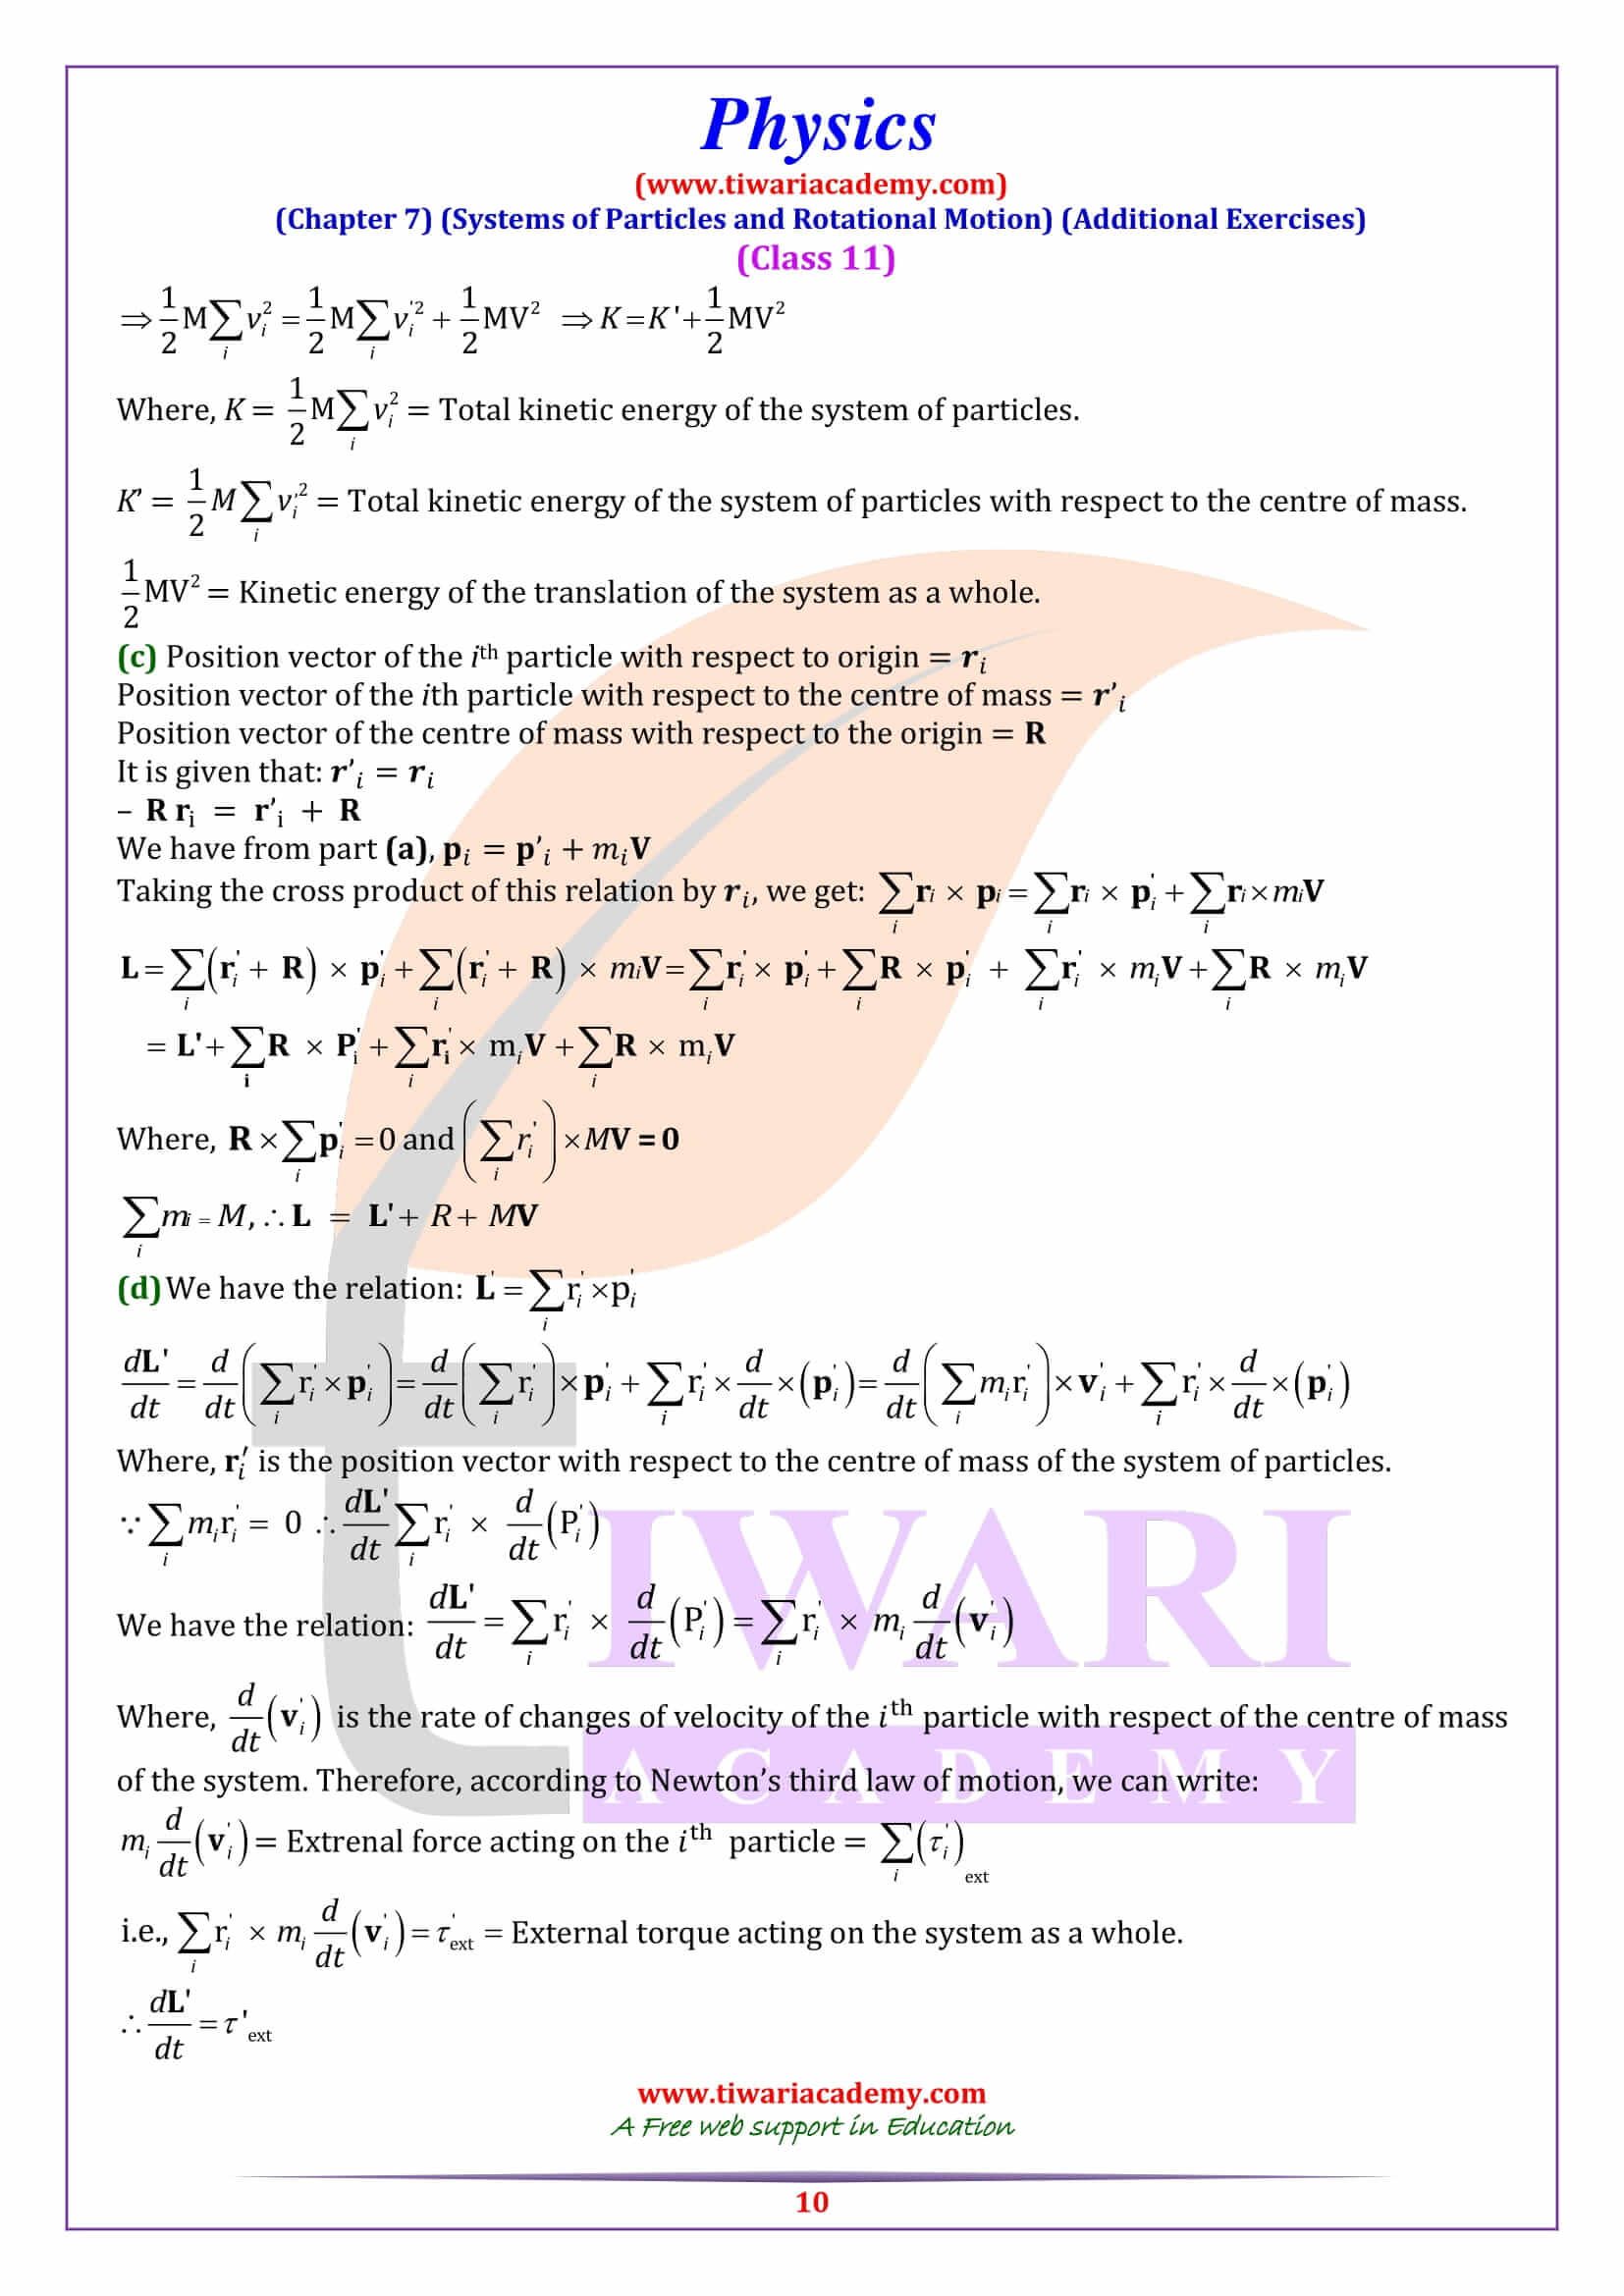 Class 11 Physics Chapter 7 Additional Exercises Solutions